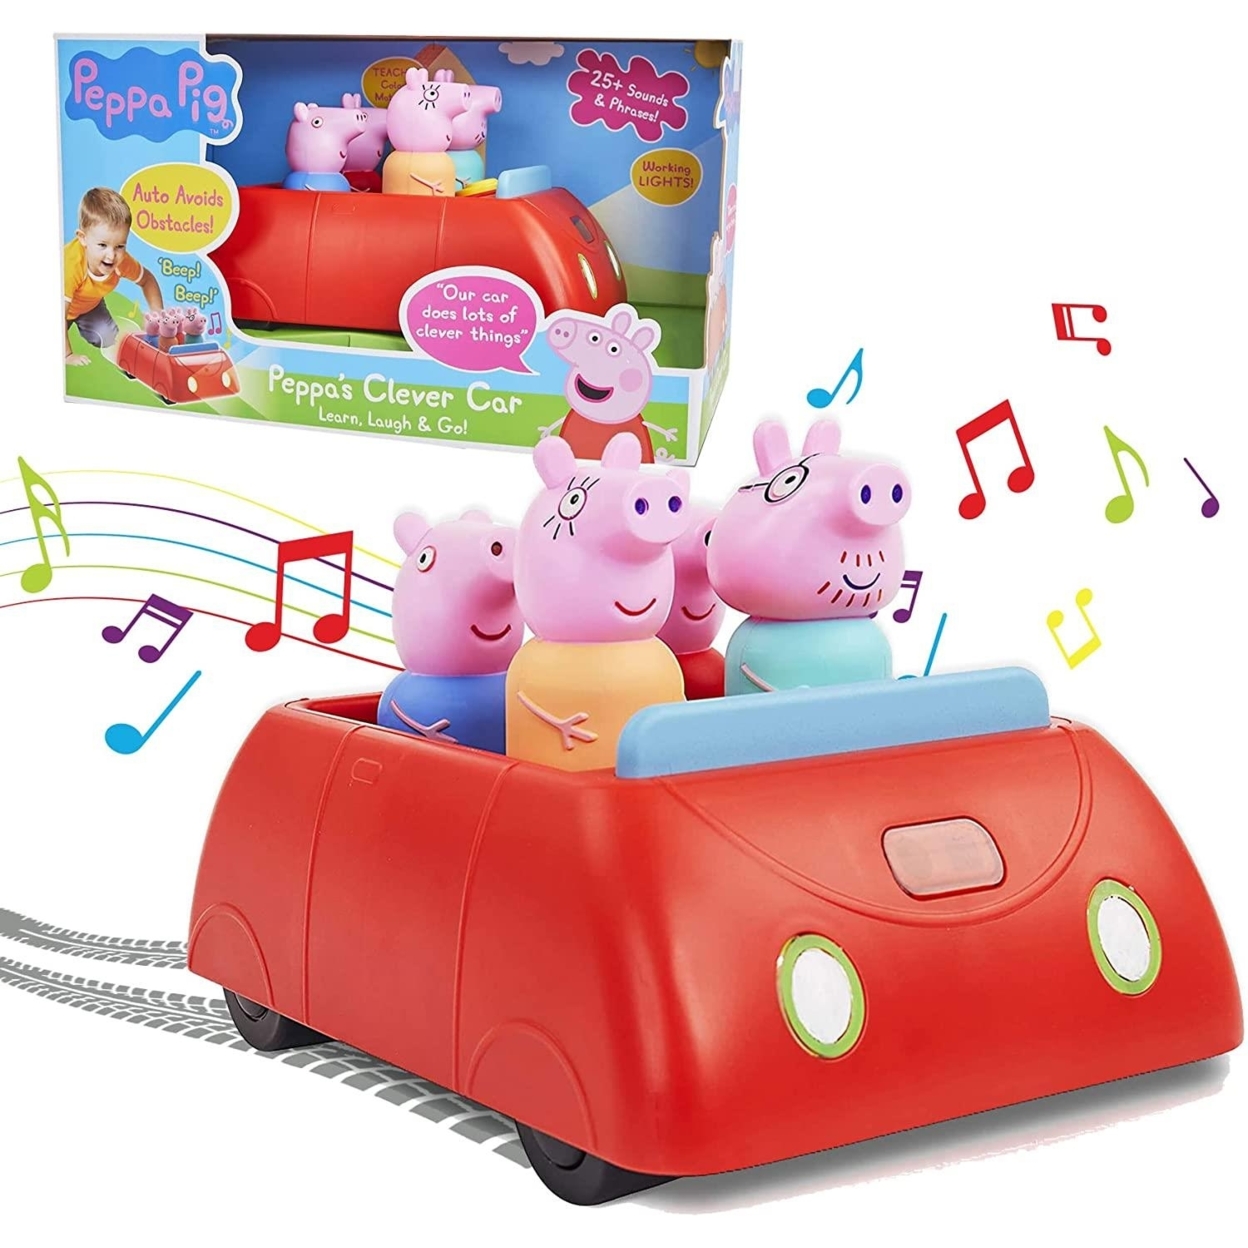 Peppa Pig's Family Red Clever Car Lights Sounds George Daddy Mummy Pig WOW! Stuff